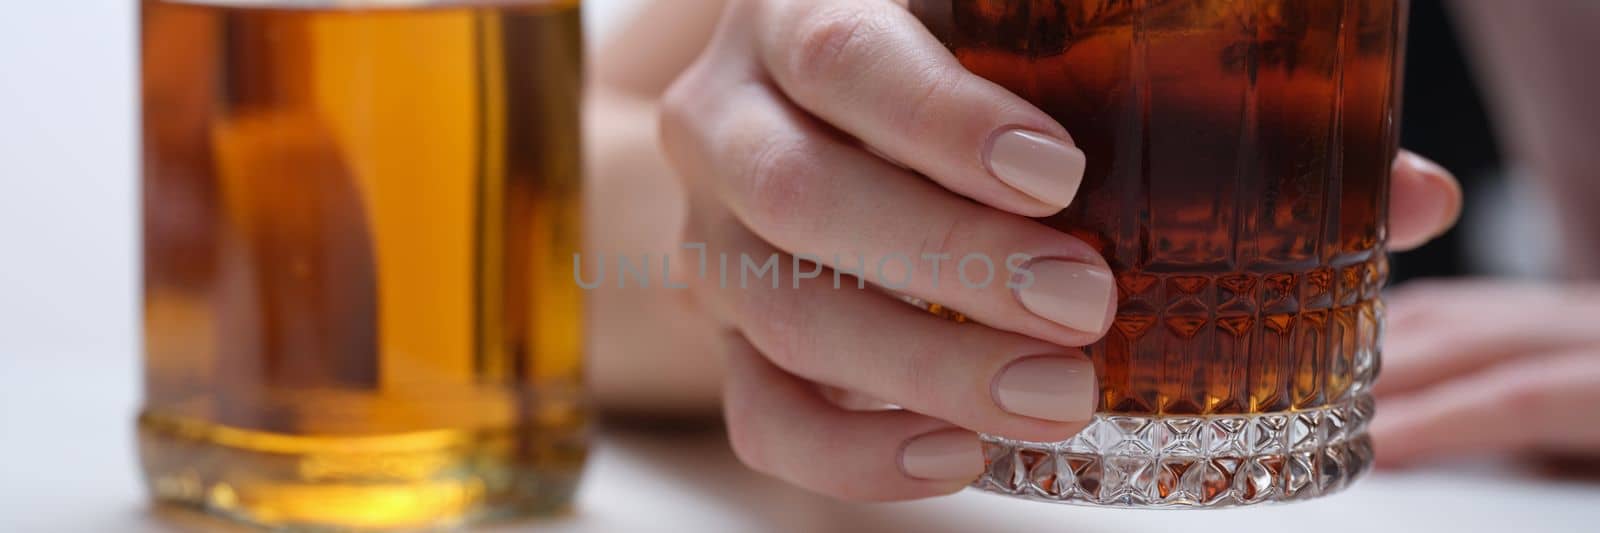 Woman hand holds glass of whiskey or cognac with bottle. Woman suffering from alcohol addiction and depressed woman drinking hard alcohol concept